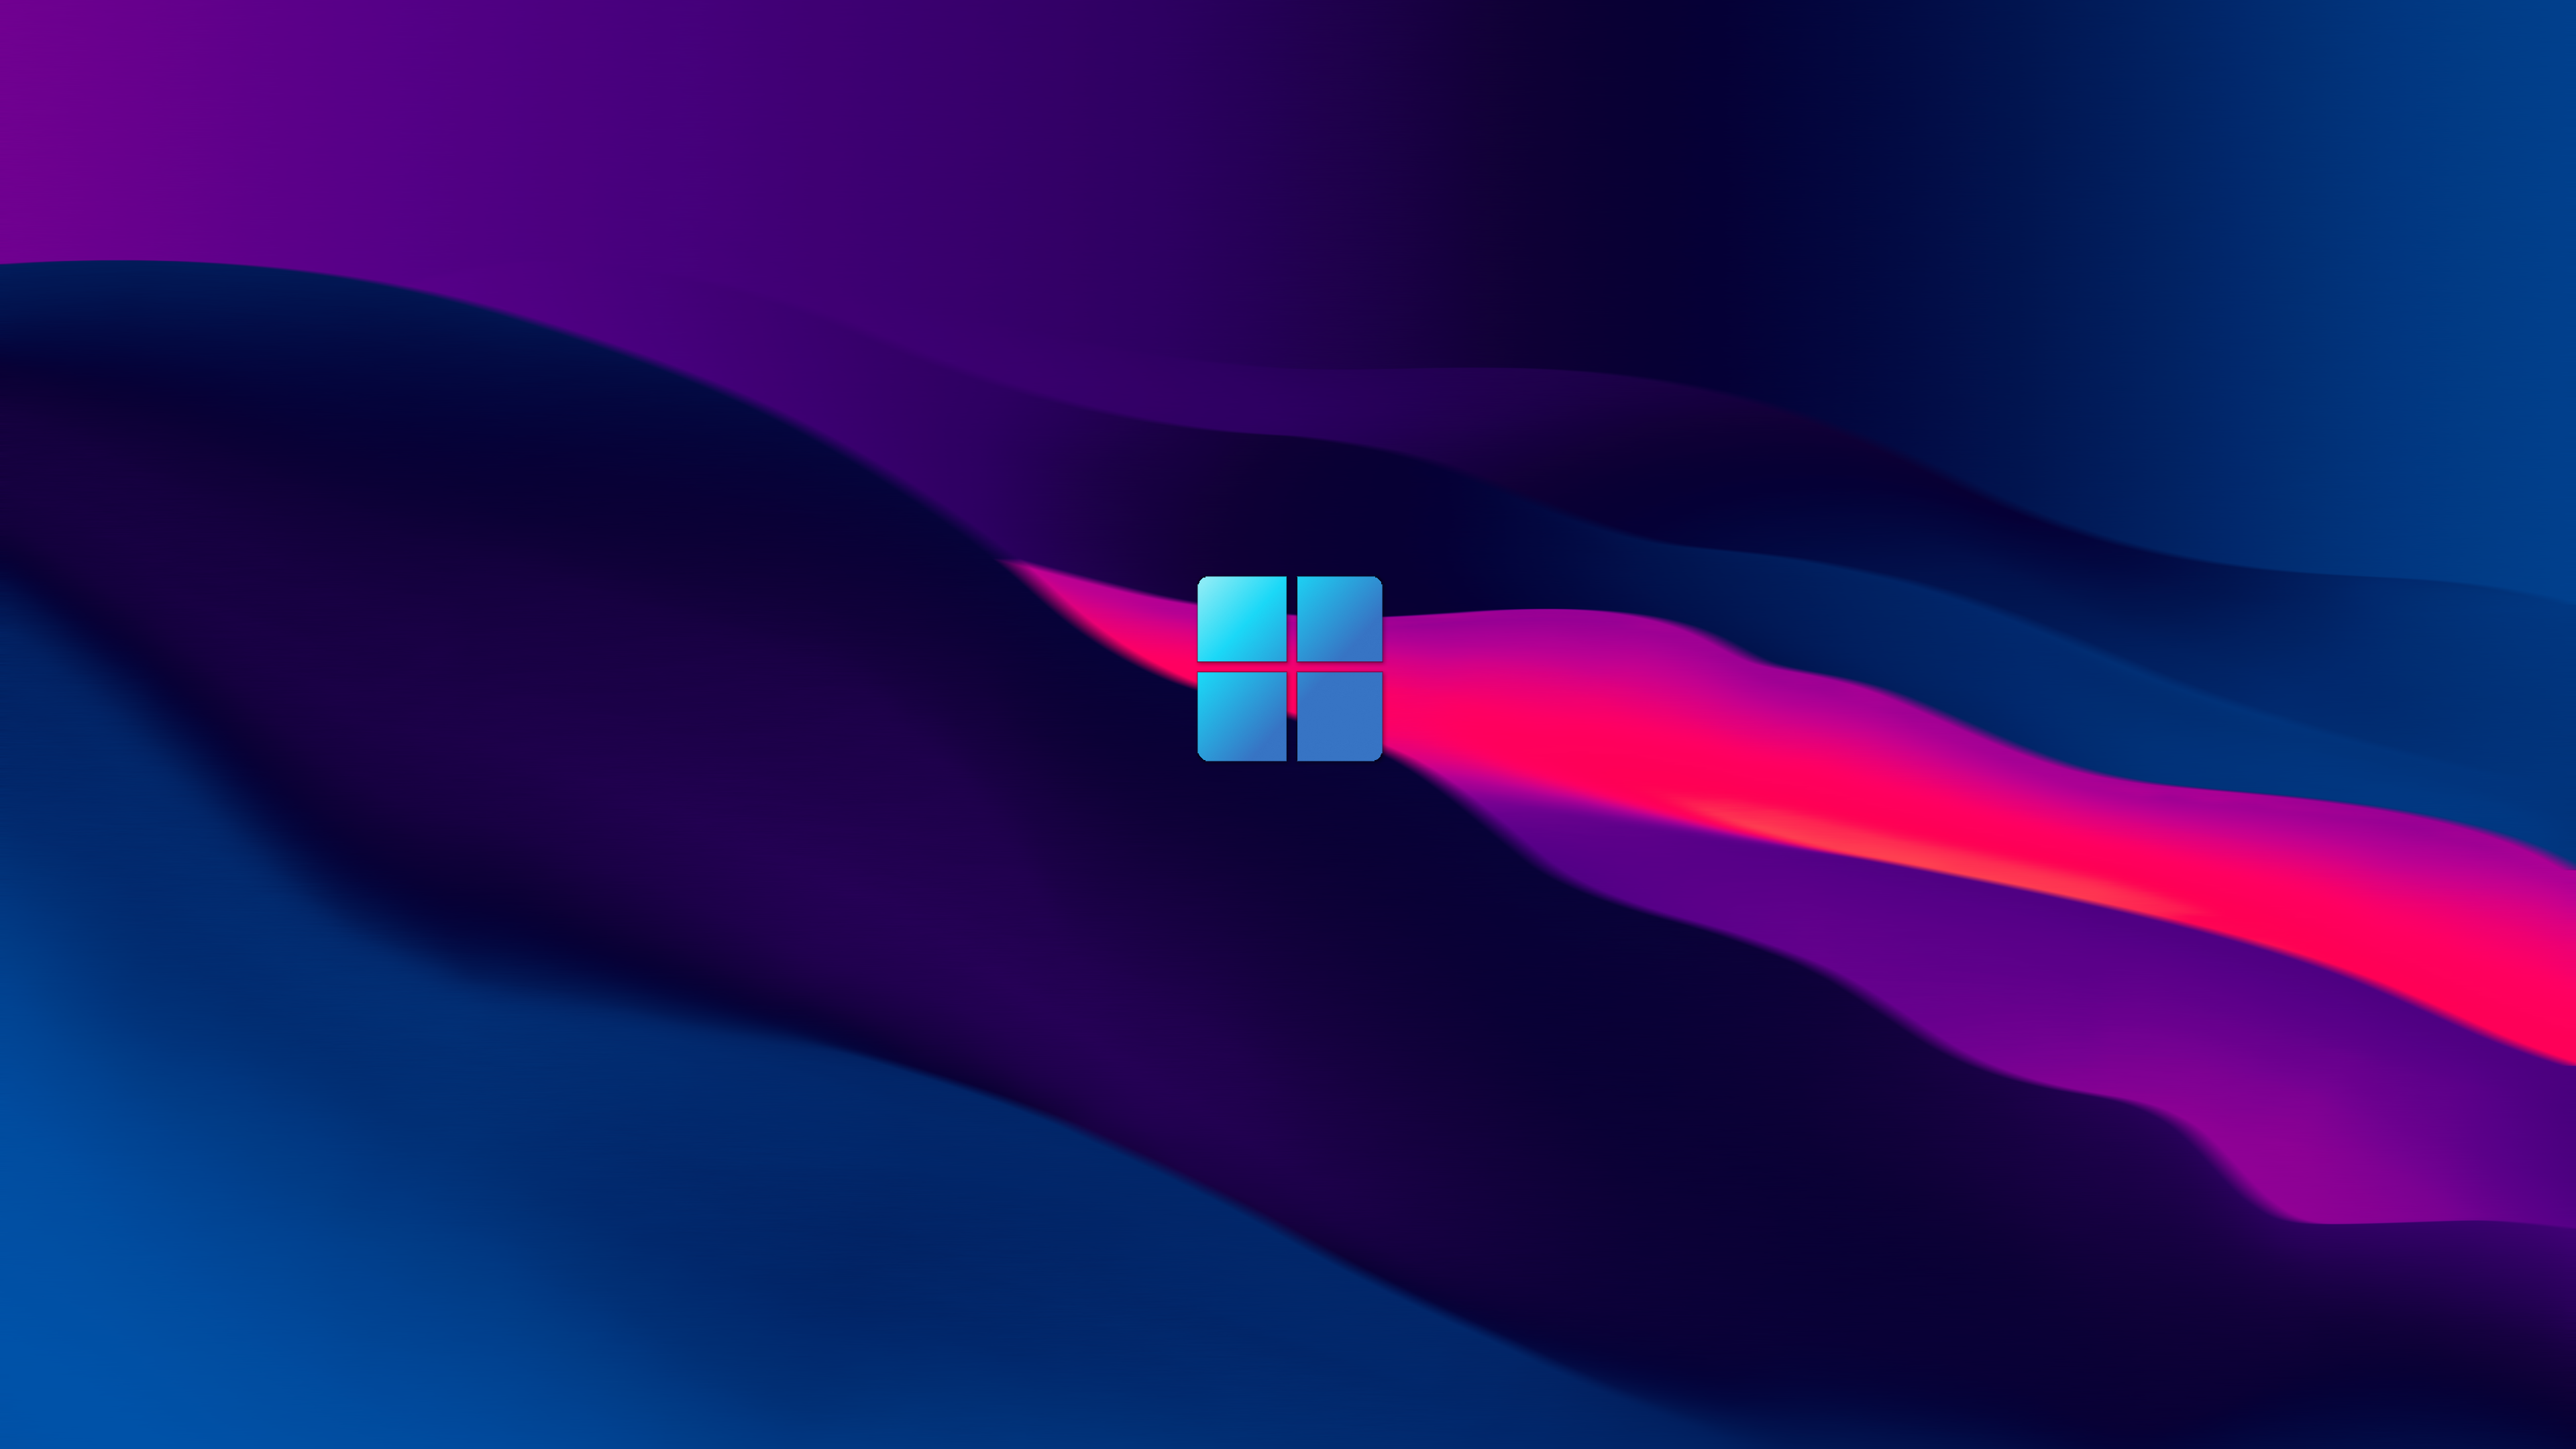 General 3840x2160 colorful abstract Windows 11 operating system Microsoft